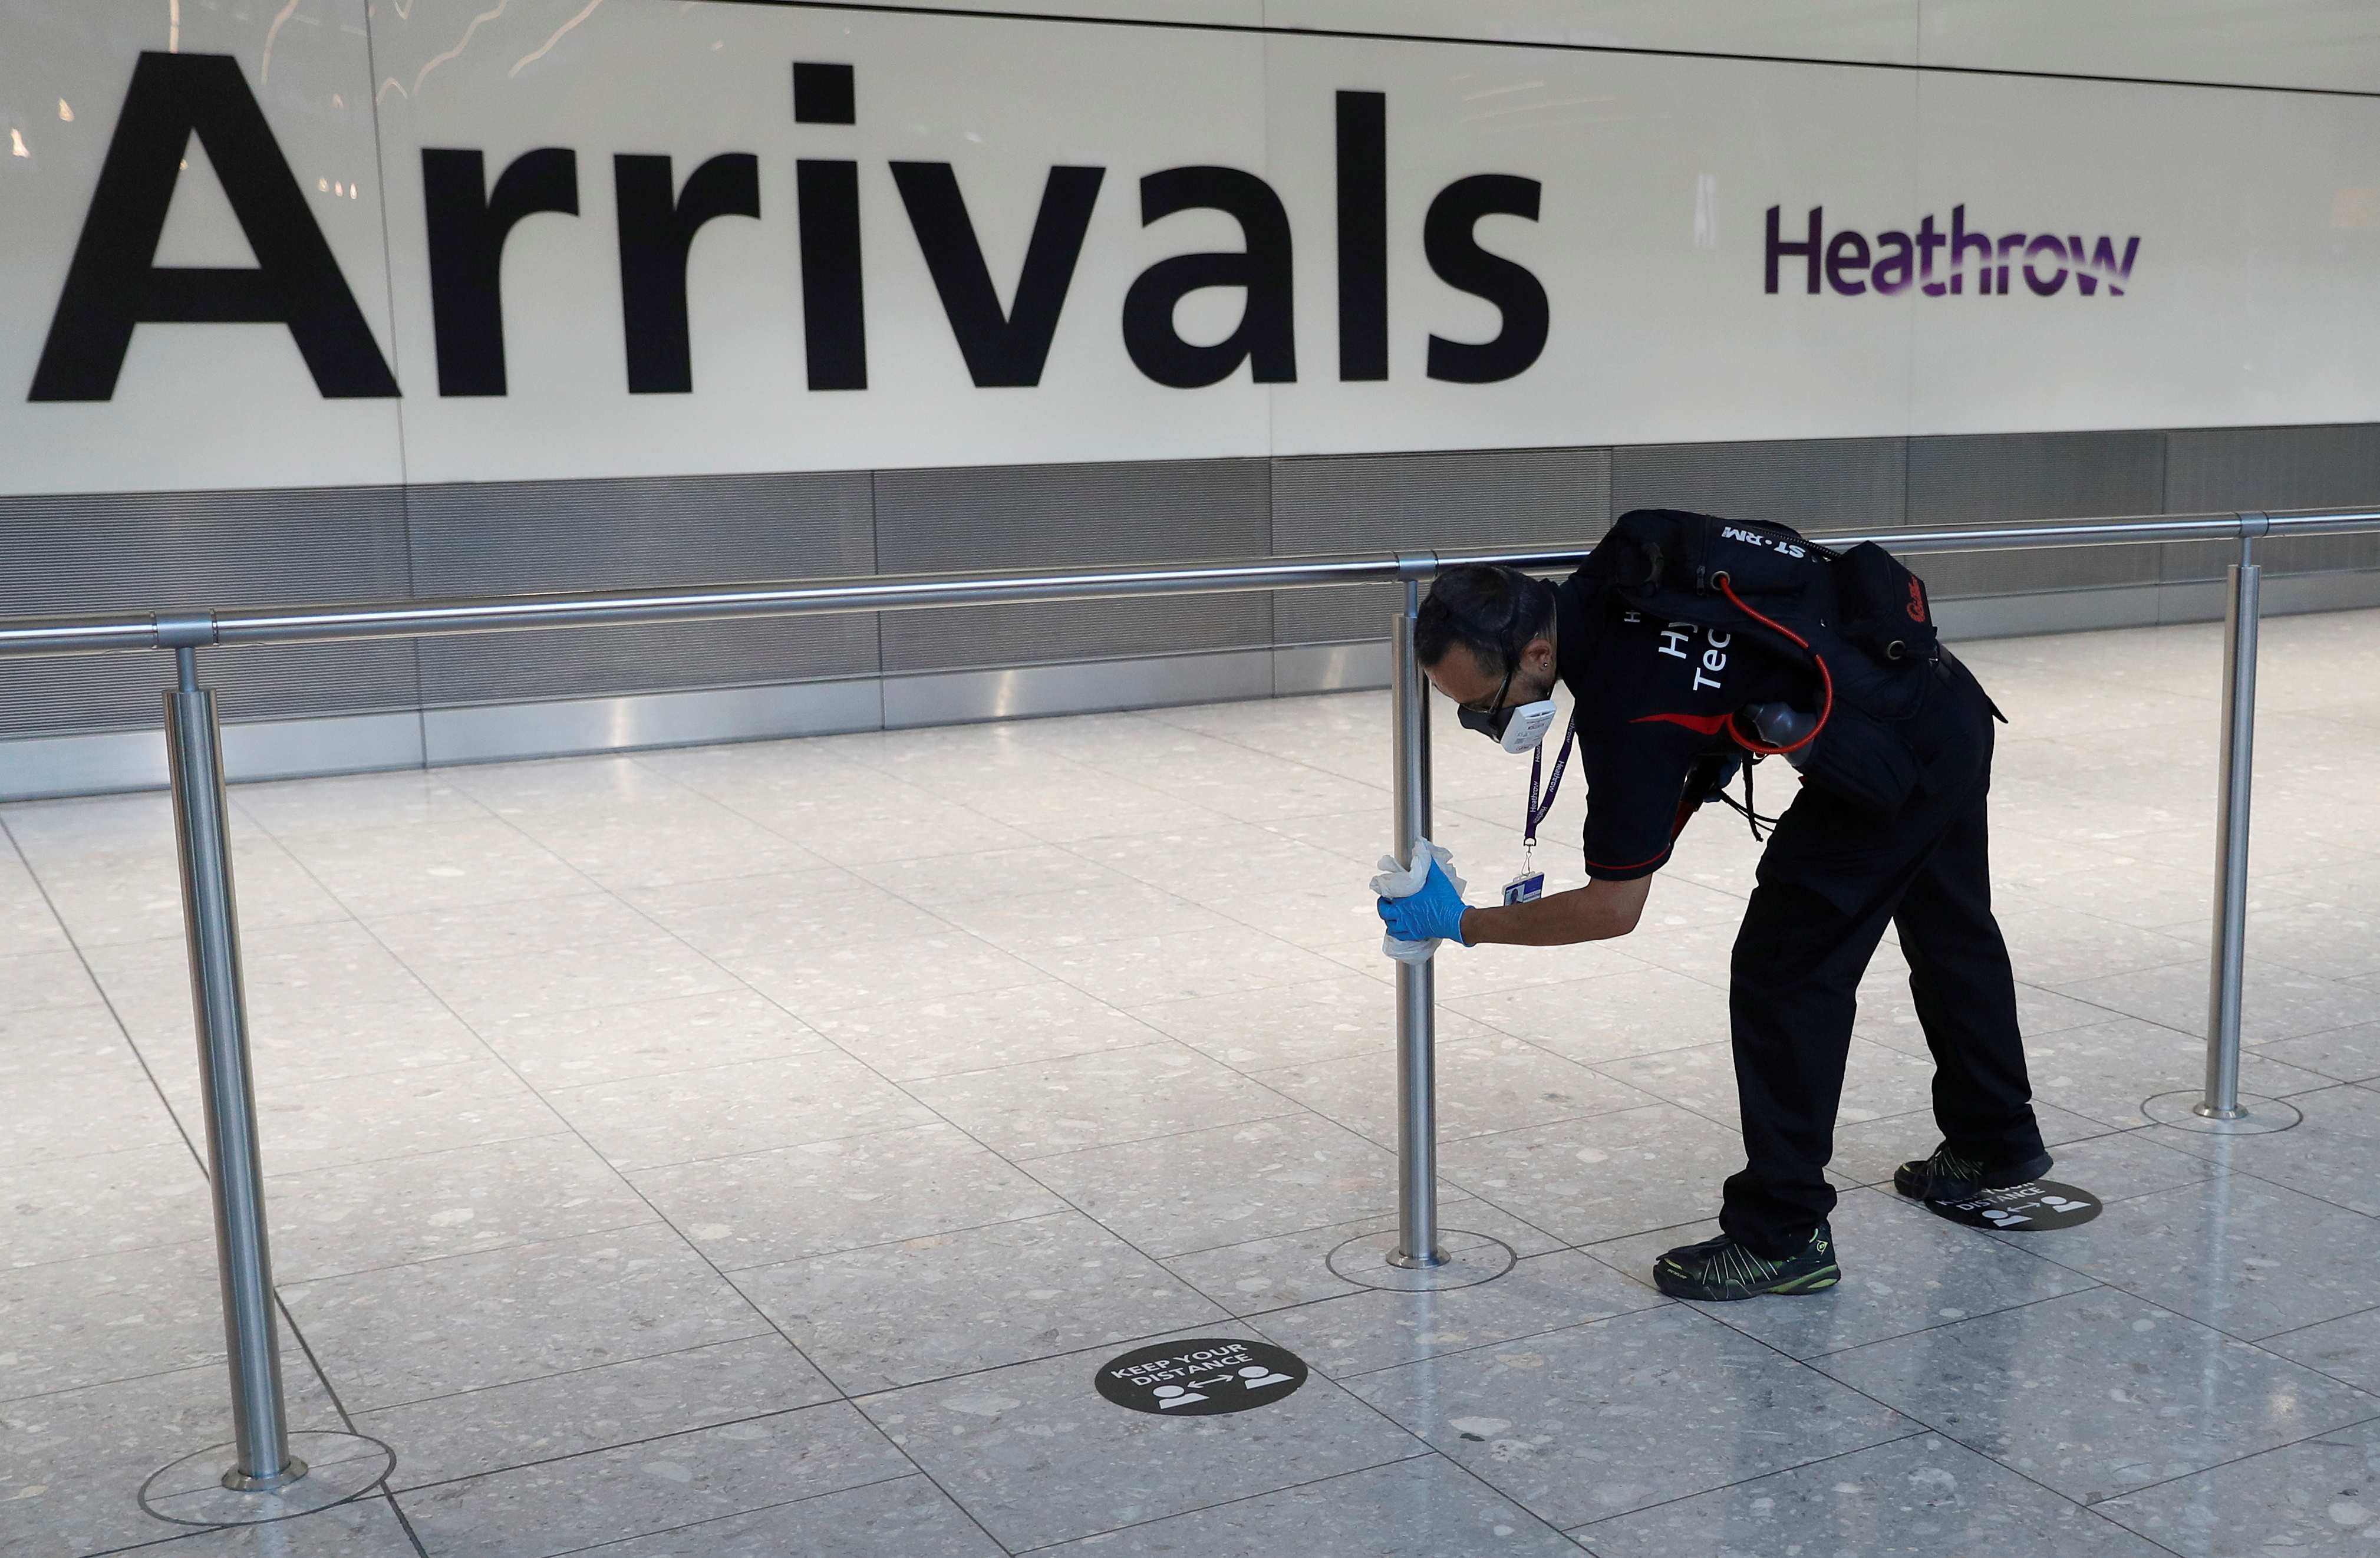 A worker sanitises a barrier at the International arrivals area of Terminal 5 in London's Heathrow Airport, Britain, August 2, 2021.  REUTERS/Peter Nicholls